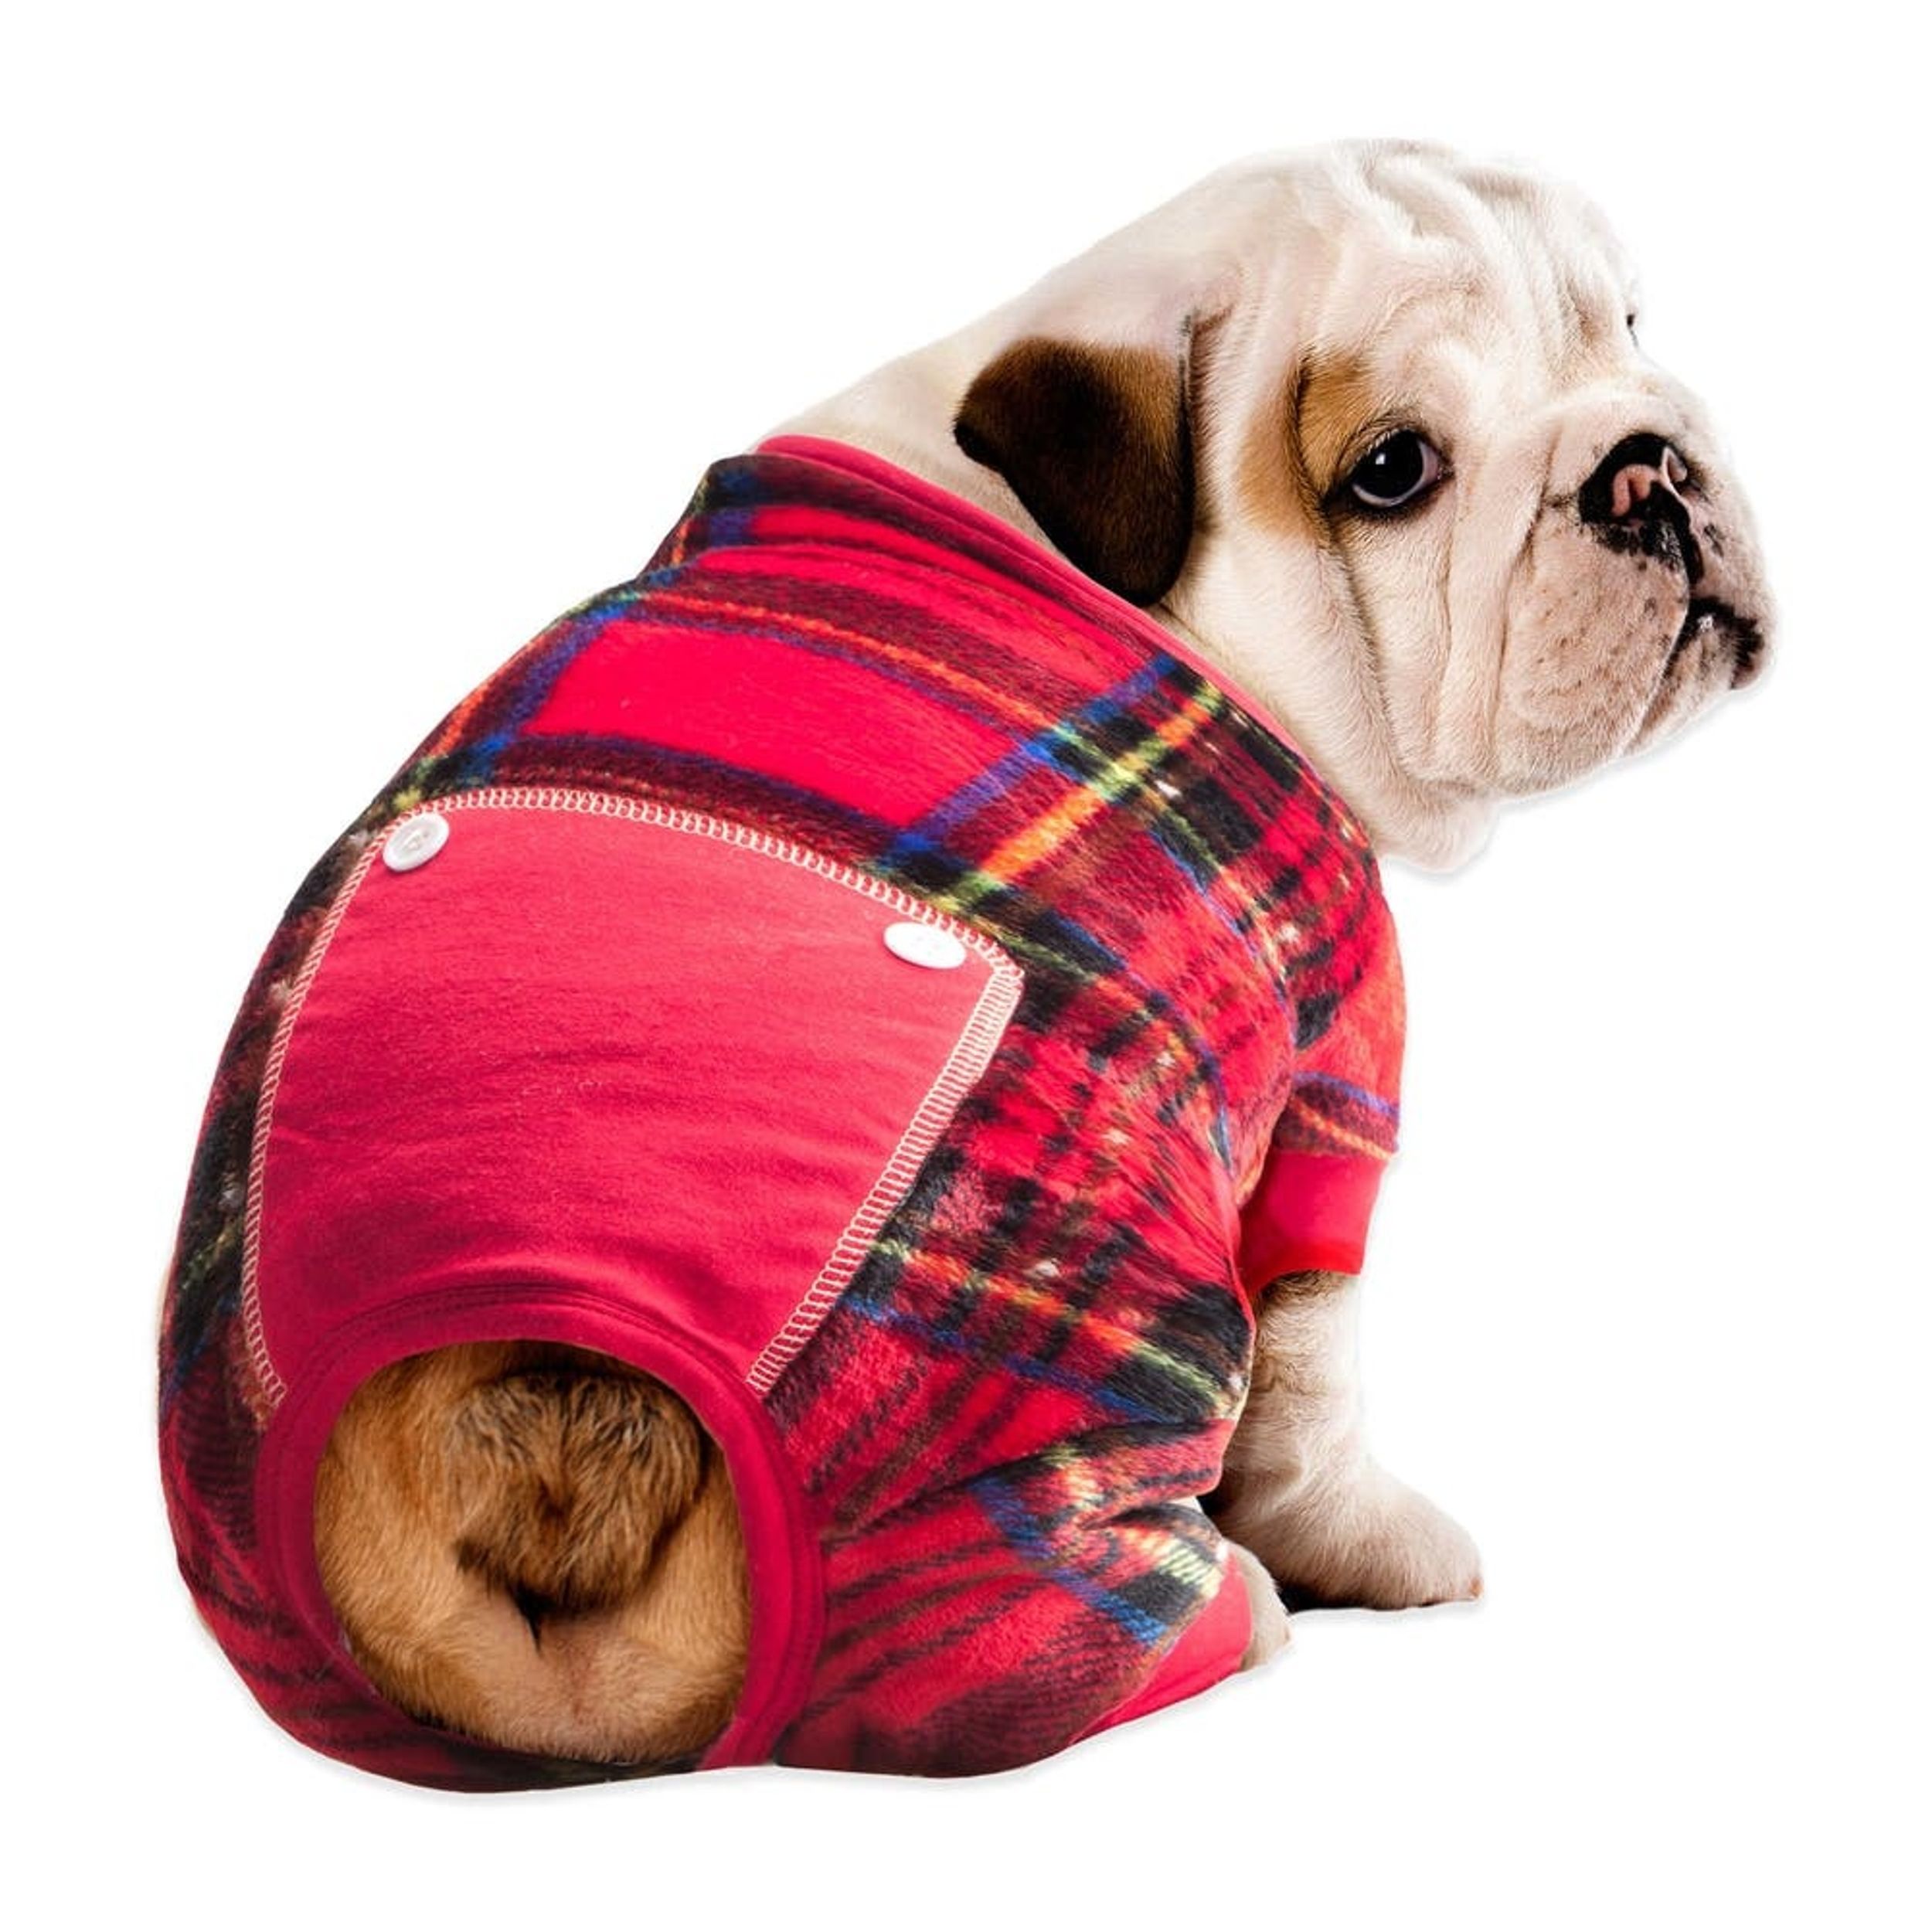 15 Winter Must-Haves for Dogs